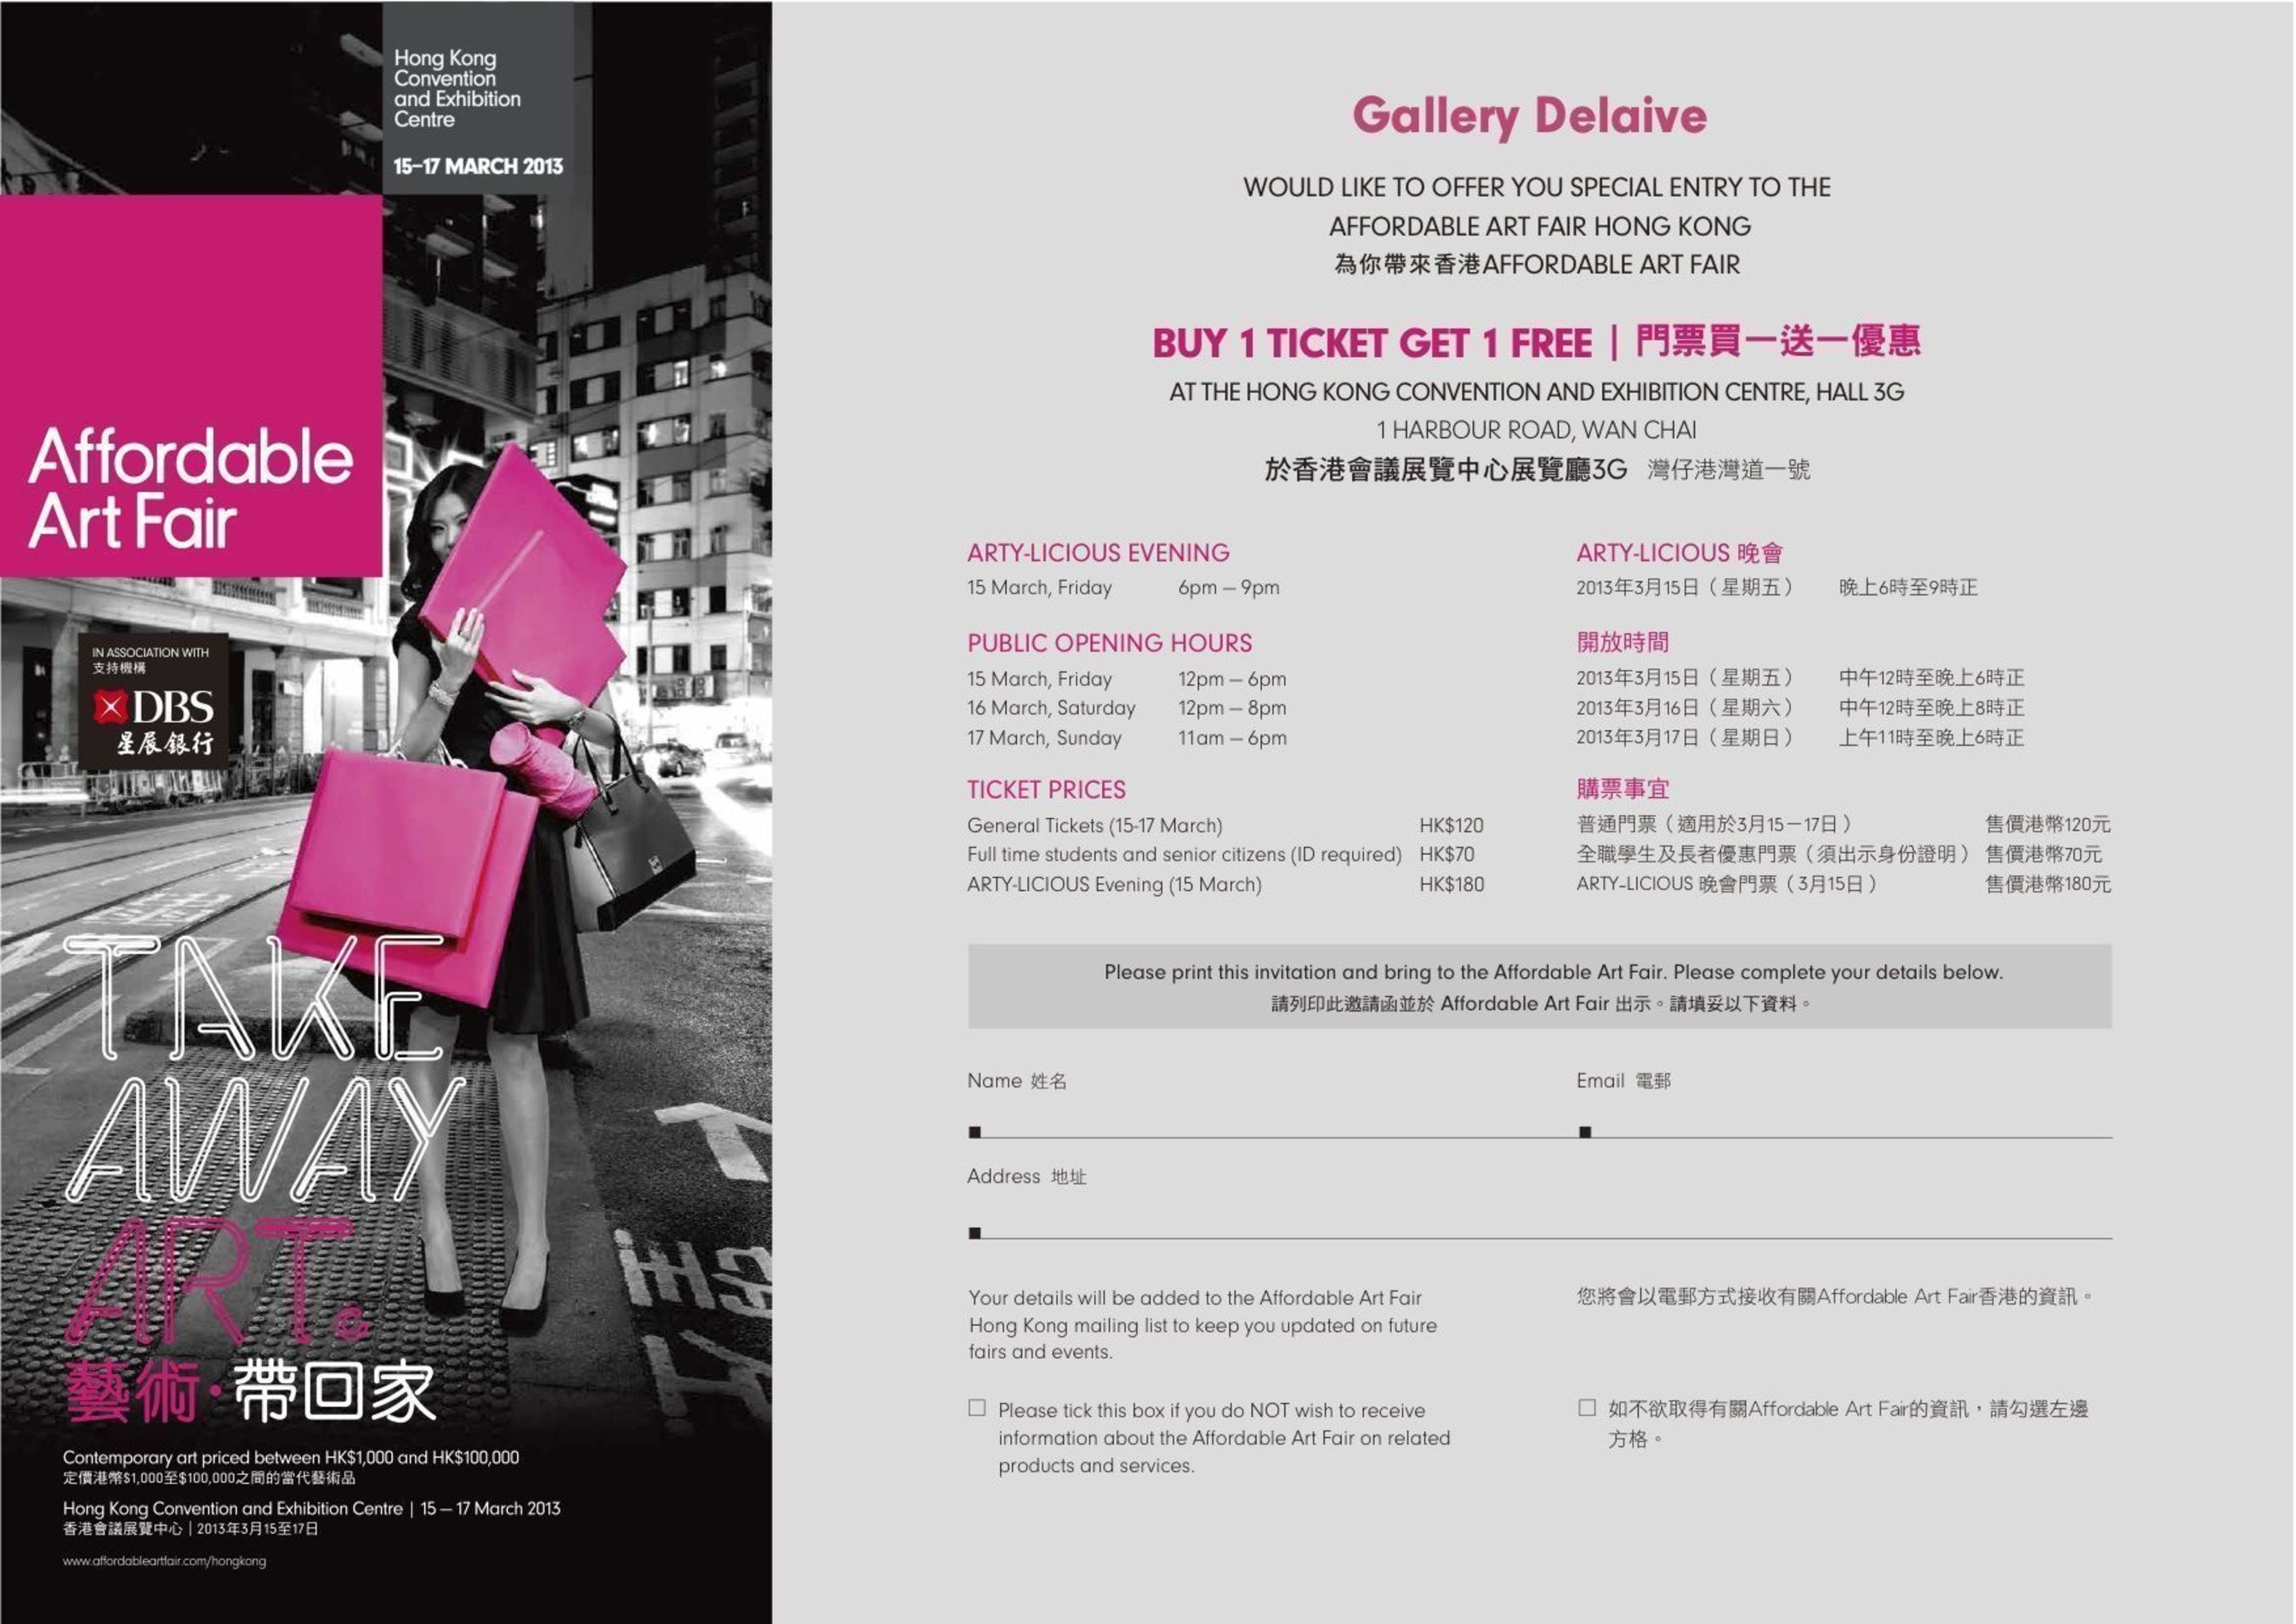 Invitation form Gallery Delaive for the Affordable Art Fair. Gallery Delaive brings Japanese Art to Hong Kong. For the first time in 25 years, Dutch Gallery Delaive will participate in the Affordable Art Fair Hong Kong. Among others there will be new work on display from young Japanese artist Yuina Wada (PRNewsFoto/Gallery Delaive)